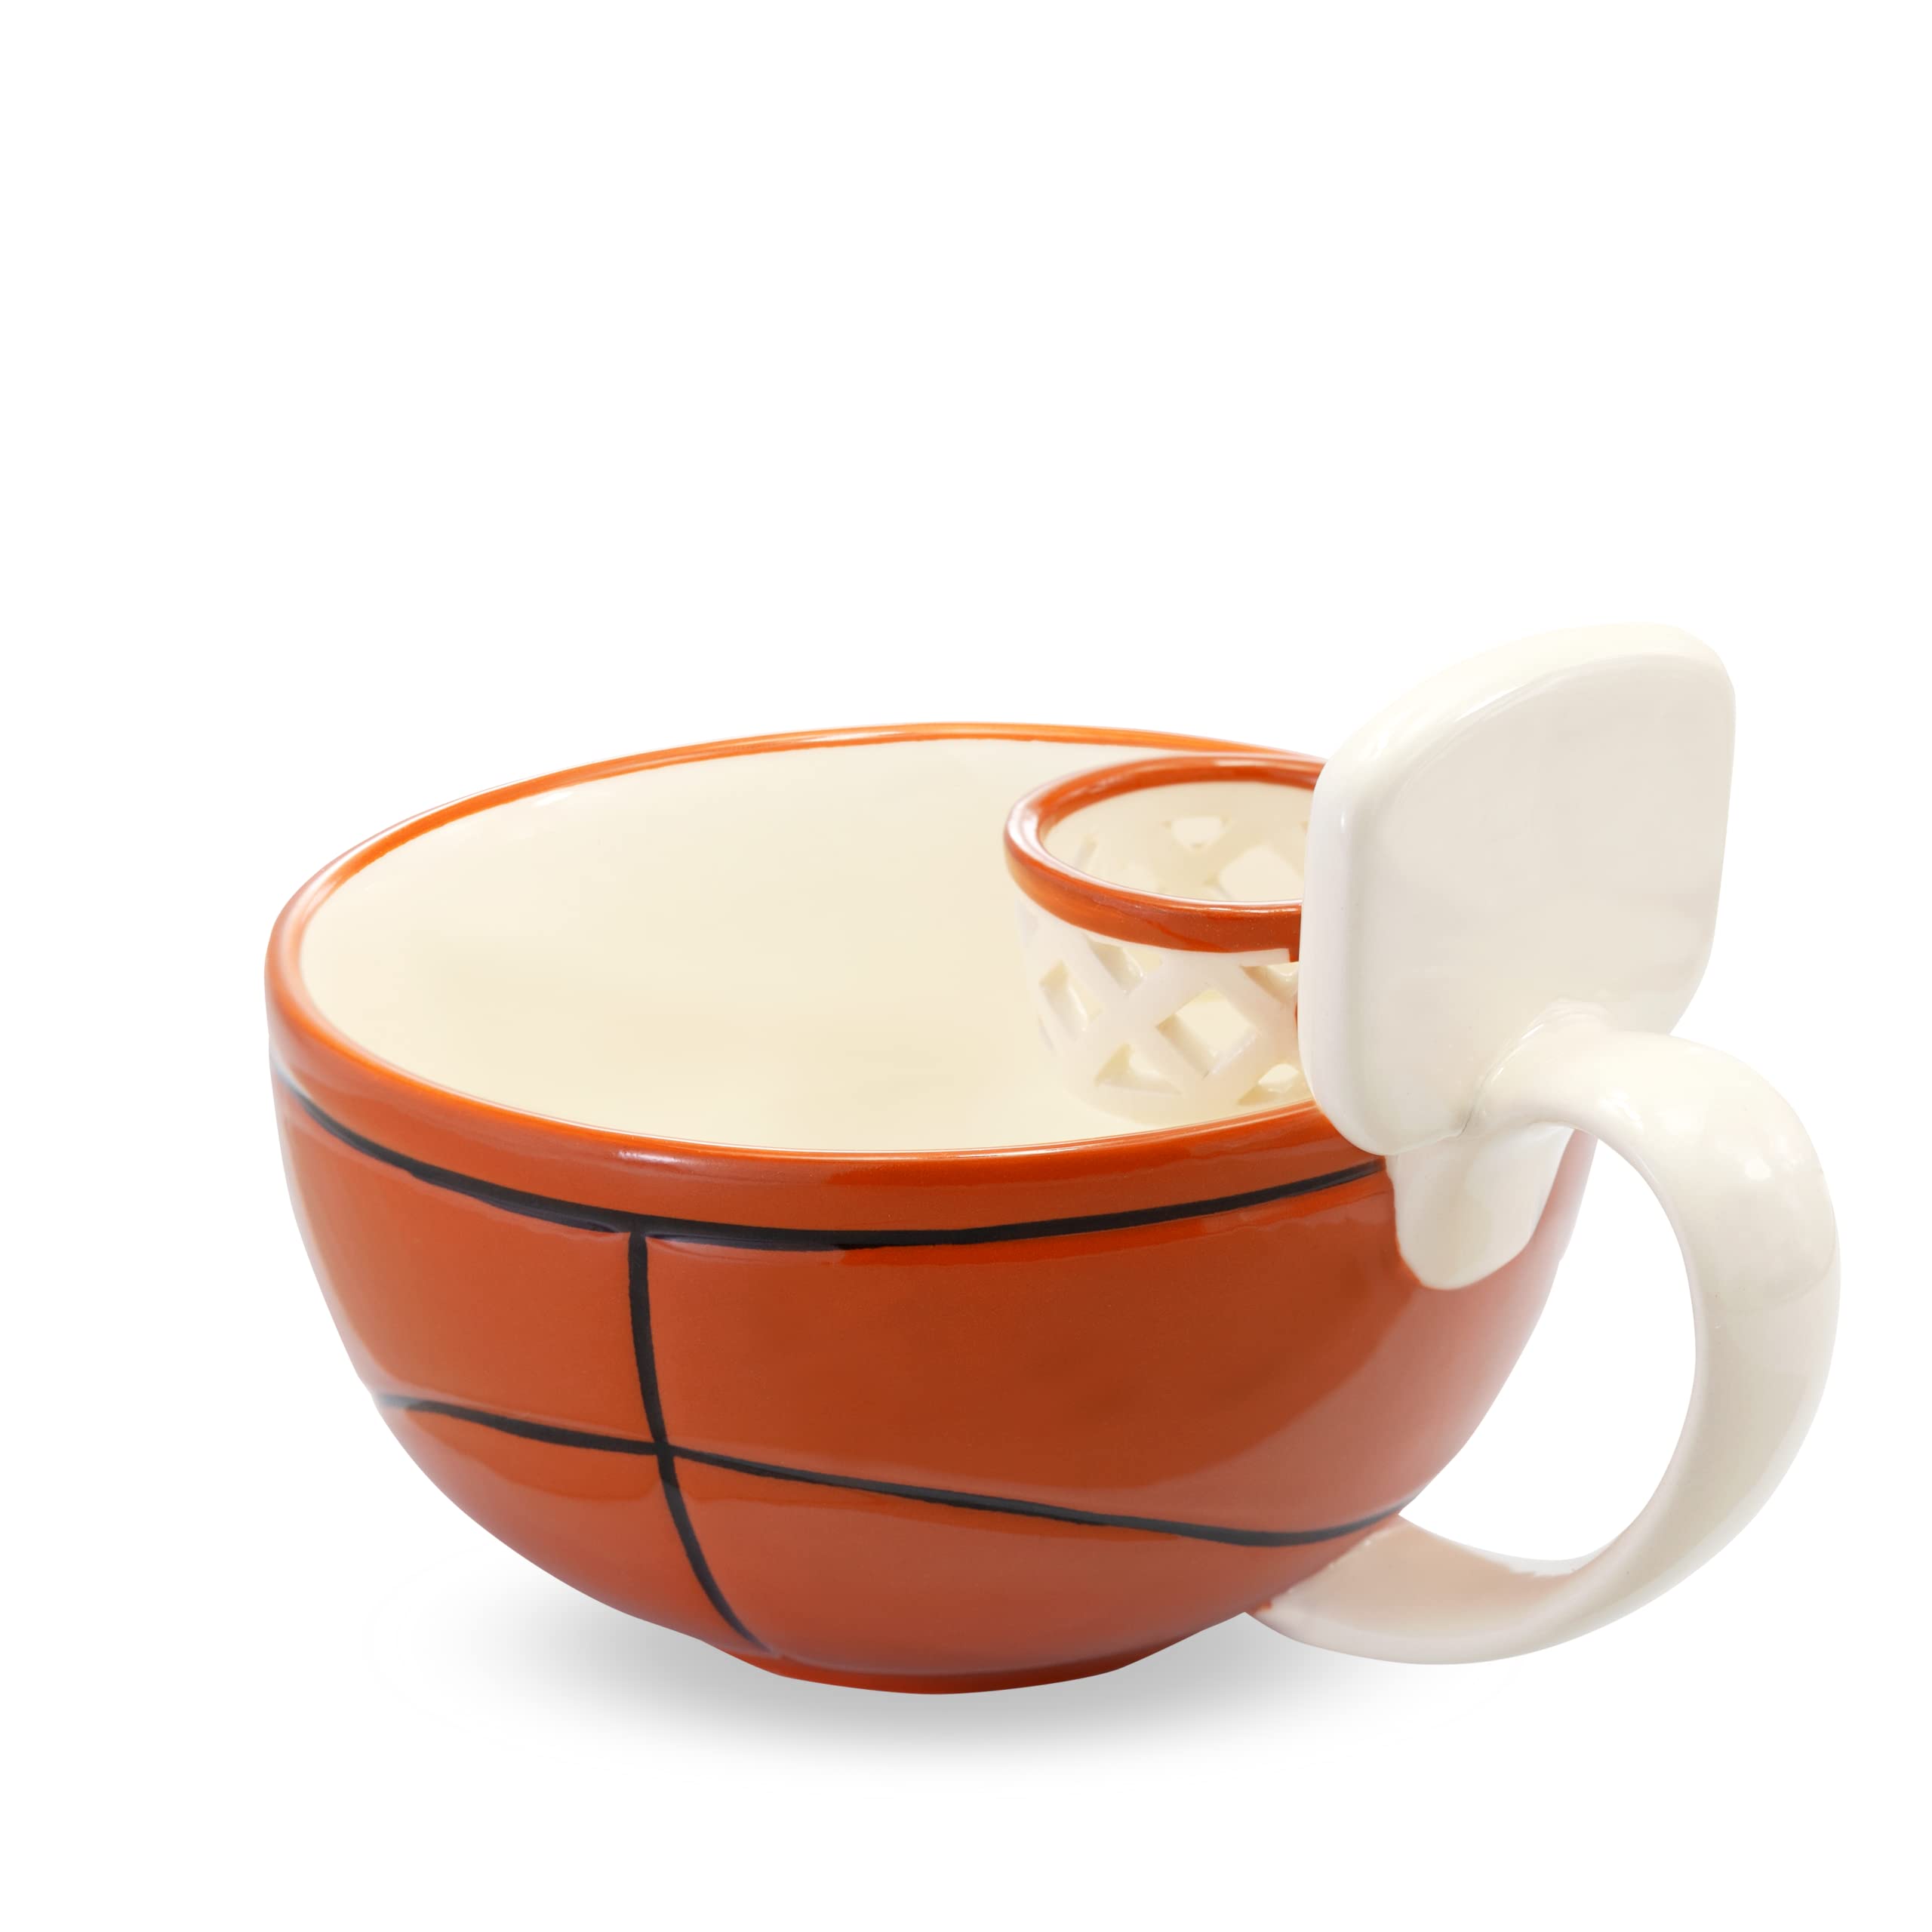 MAX'IS Creations | The Mug with a Hoop| Coffee & Hot Chocolate Mug, Cereal, Soup Bowl Cup | Novelty Gift Basketball Accessories for Sports Coaches, Dad, Mom, Gifts for Boys 8-12 &Girls